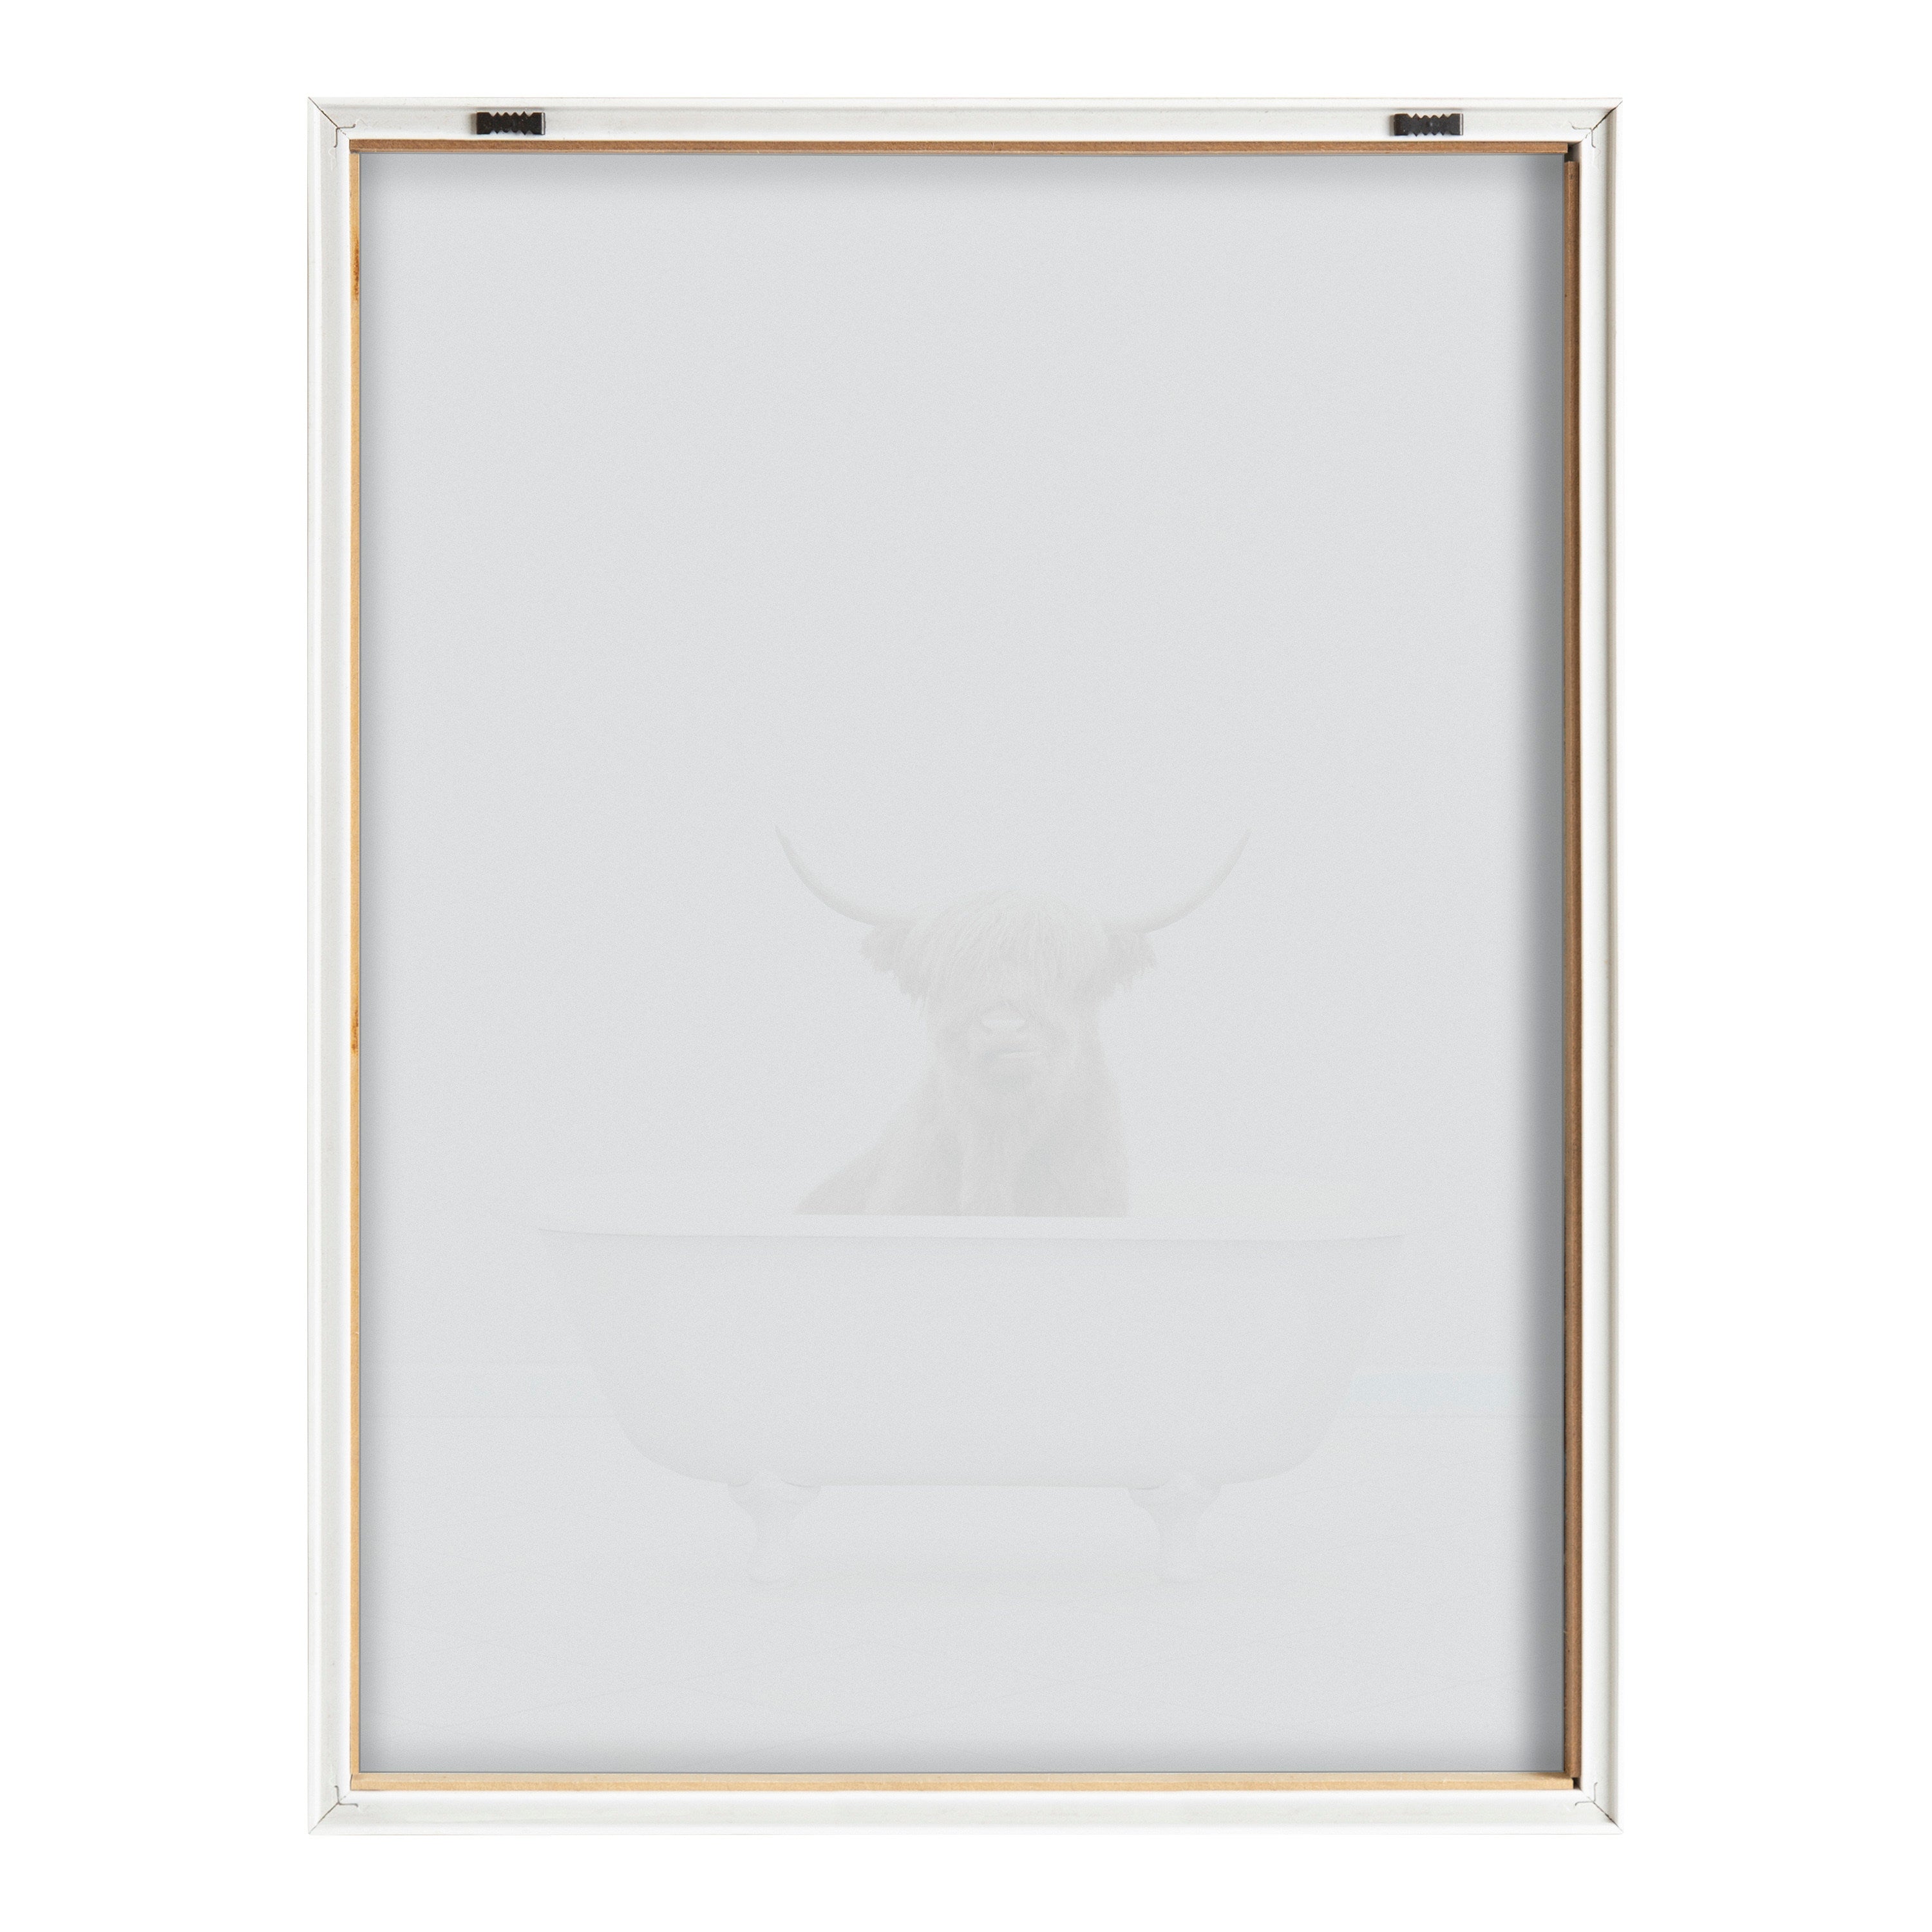 Blake Highland Cow Solo Bathtub Framed Printed Glass by Amy Peterson